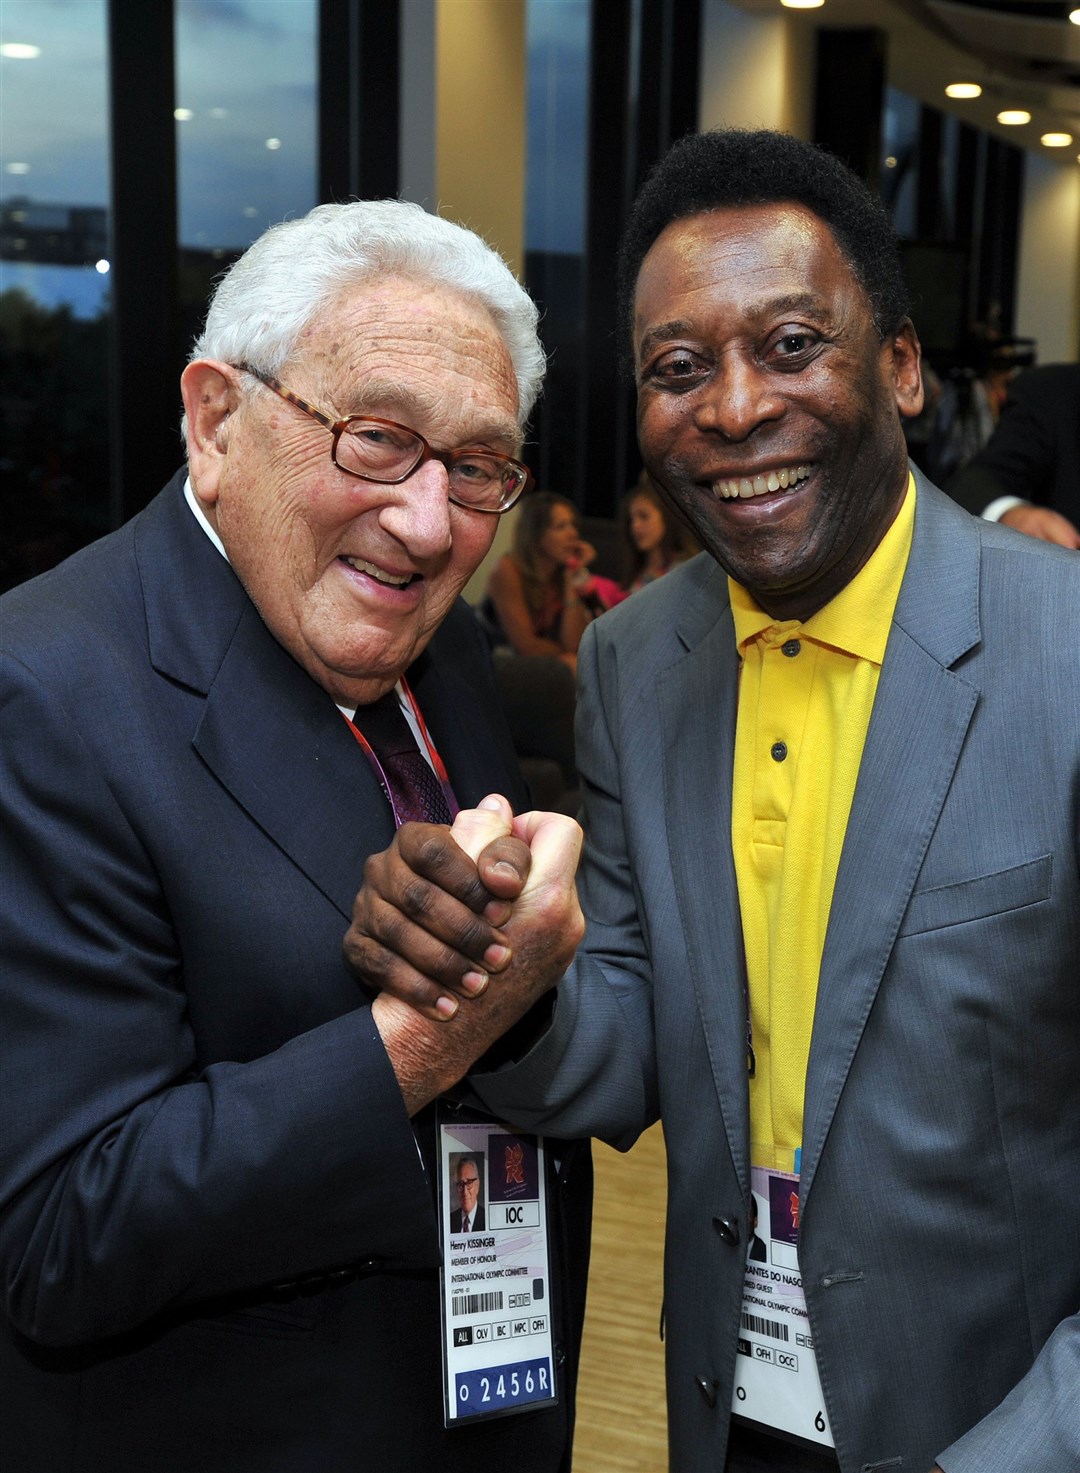 Brazilian football great Pele with Mr Kissinger at the closing ceremony of the 2012 London Olympic Games (PA)